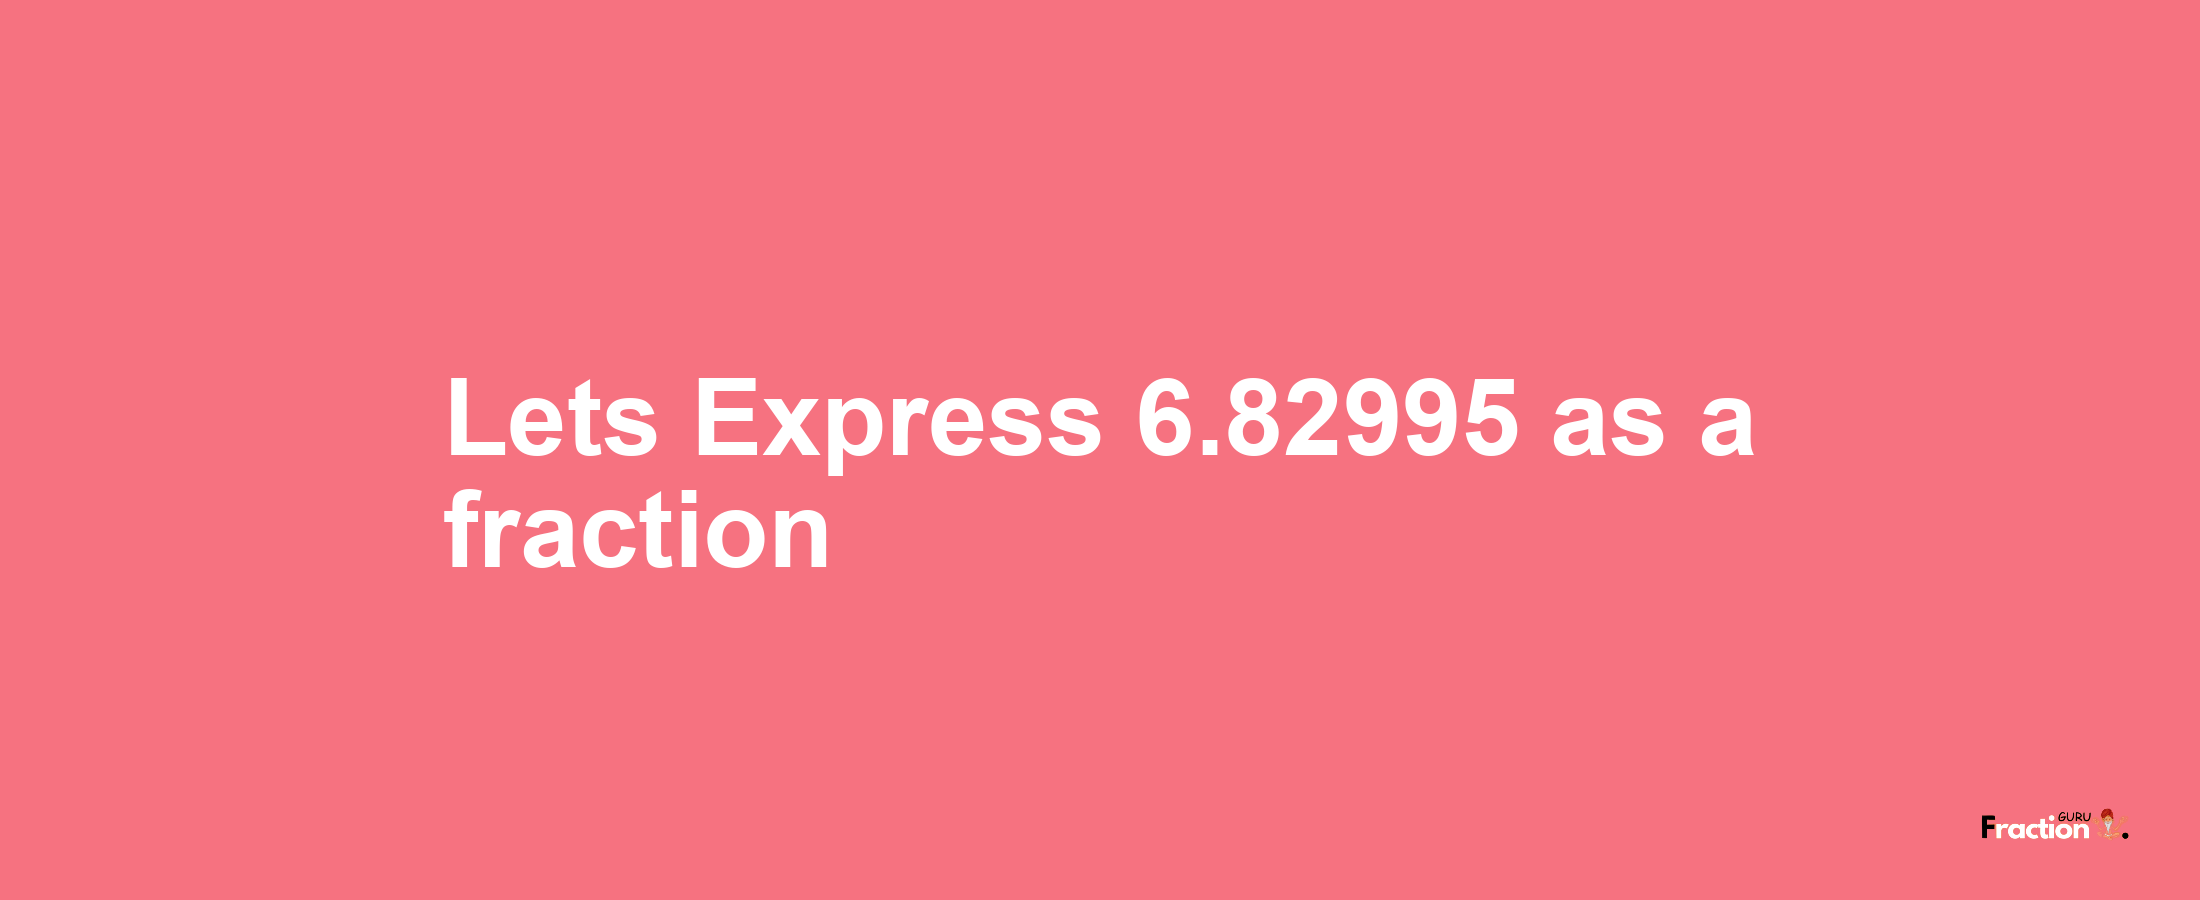 Lets Express 6.82995 as afraction